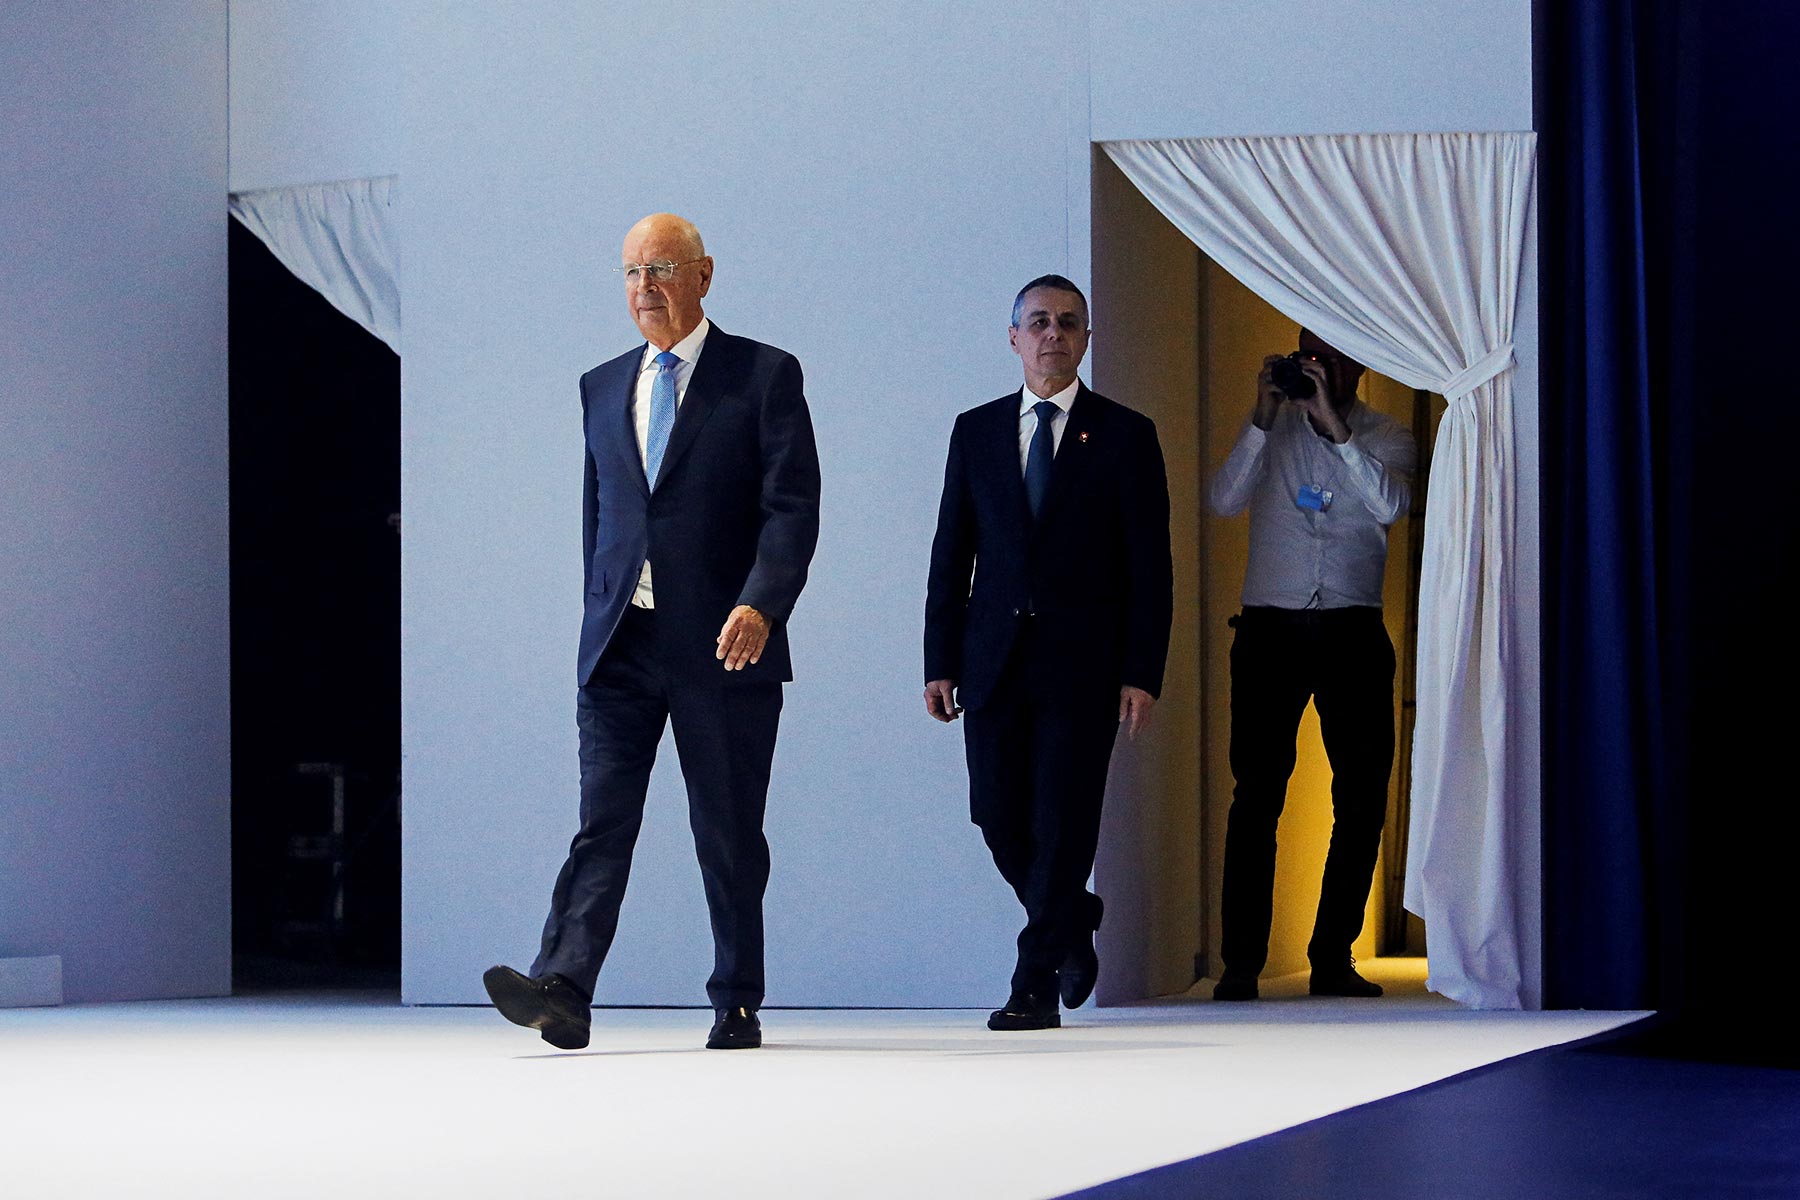 Swiss President Ignazio Cassis and Founder and Executive chairman Klaus Schwab arrive for the opening ceremony of the World Economic Forum in Davos, Switzerland May 23, 2022. (Arnd Wiegmann—Reuters)